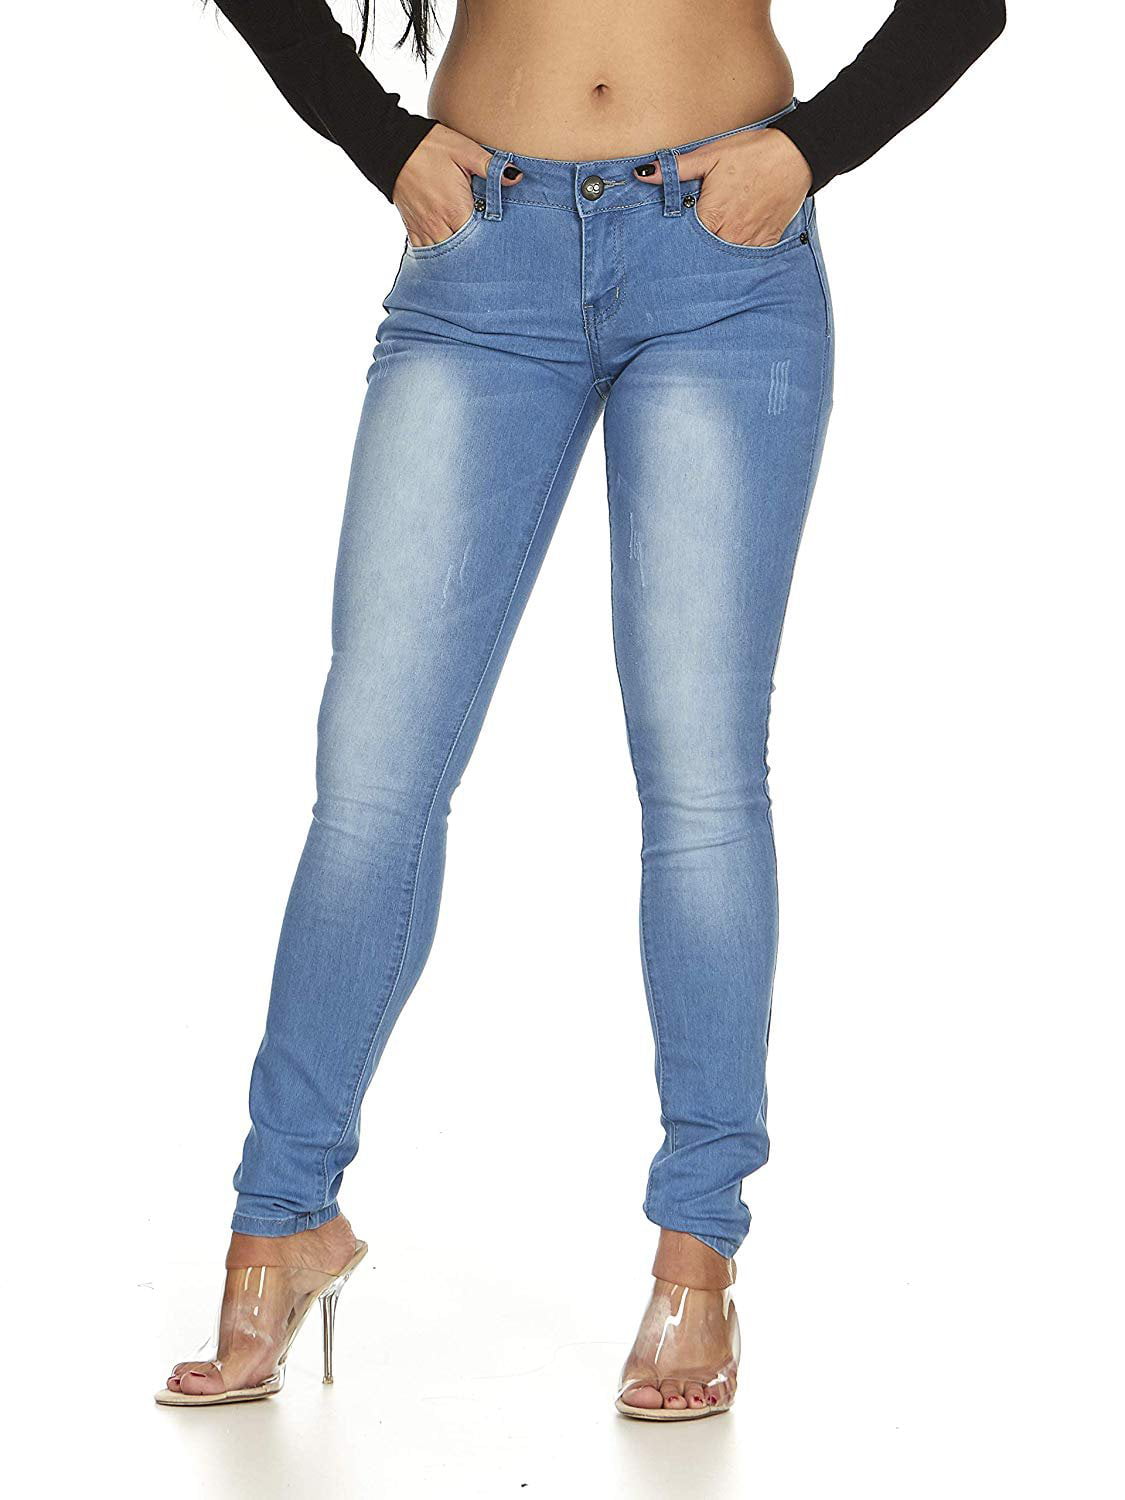 Classic Skinny Jeans for Women Electric Blue Fit Stone Jeans Sizes Washed 7 Stretch Slim Juniors